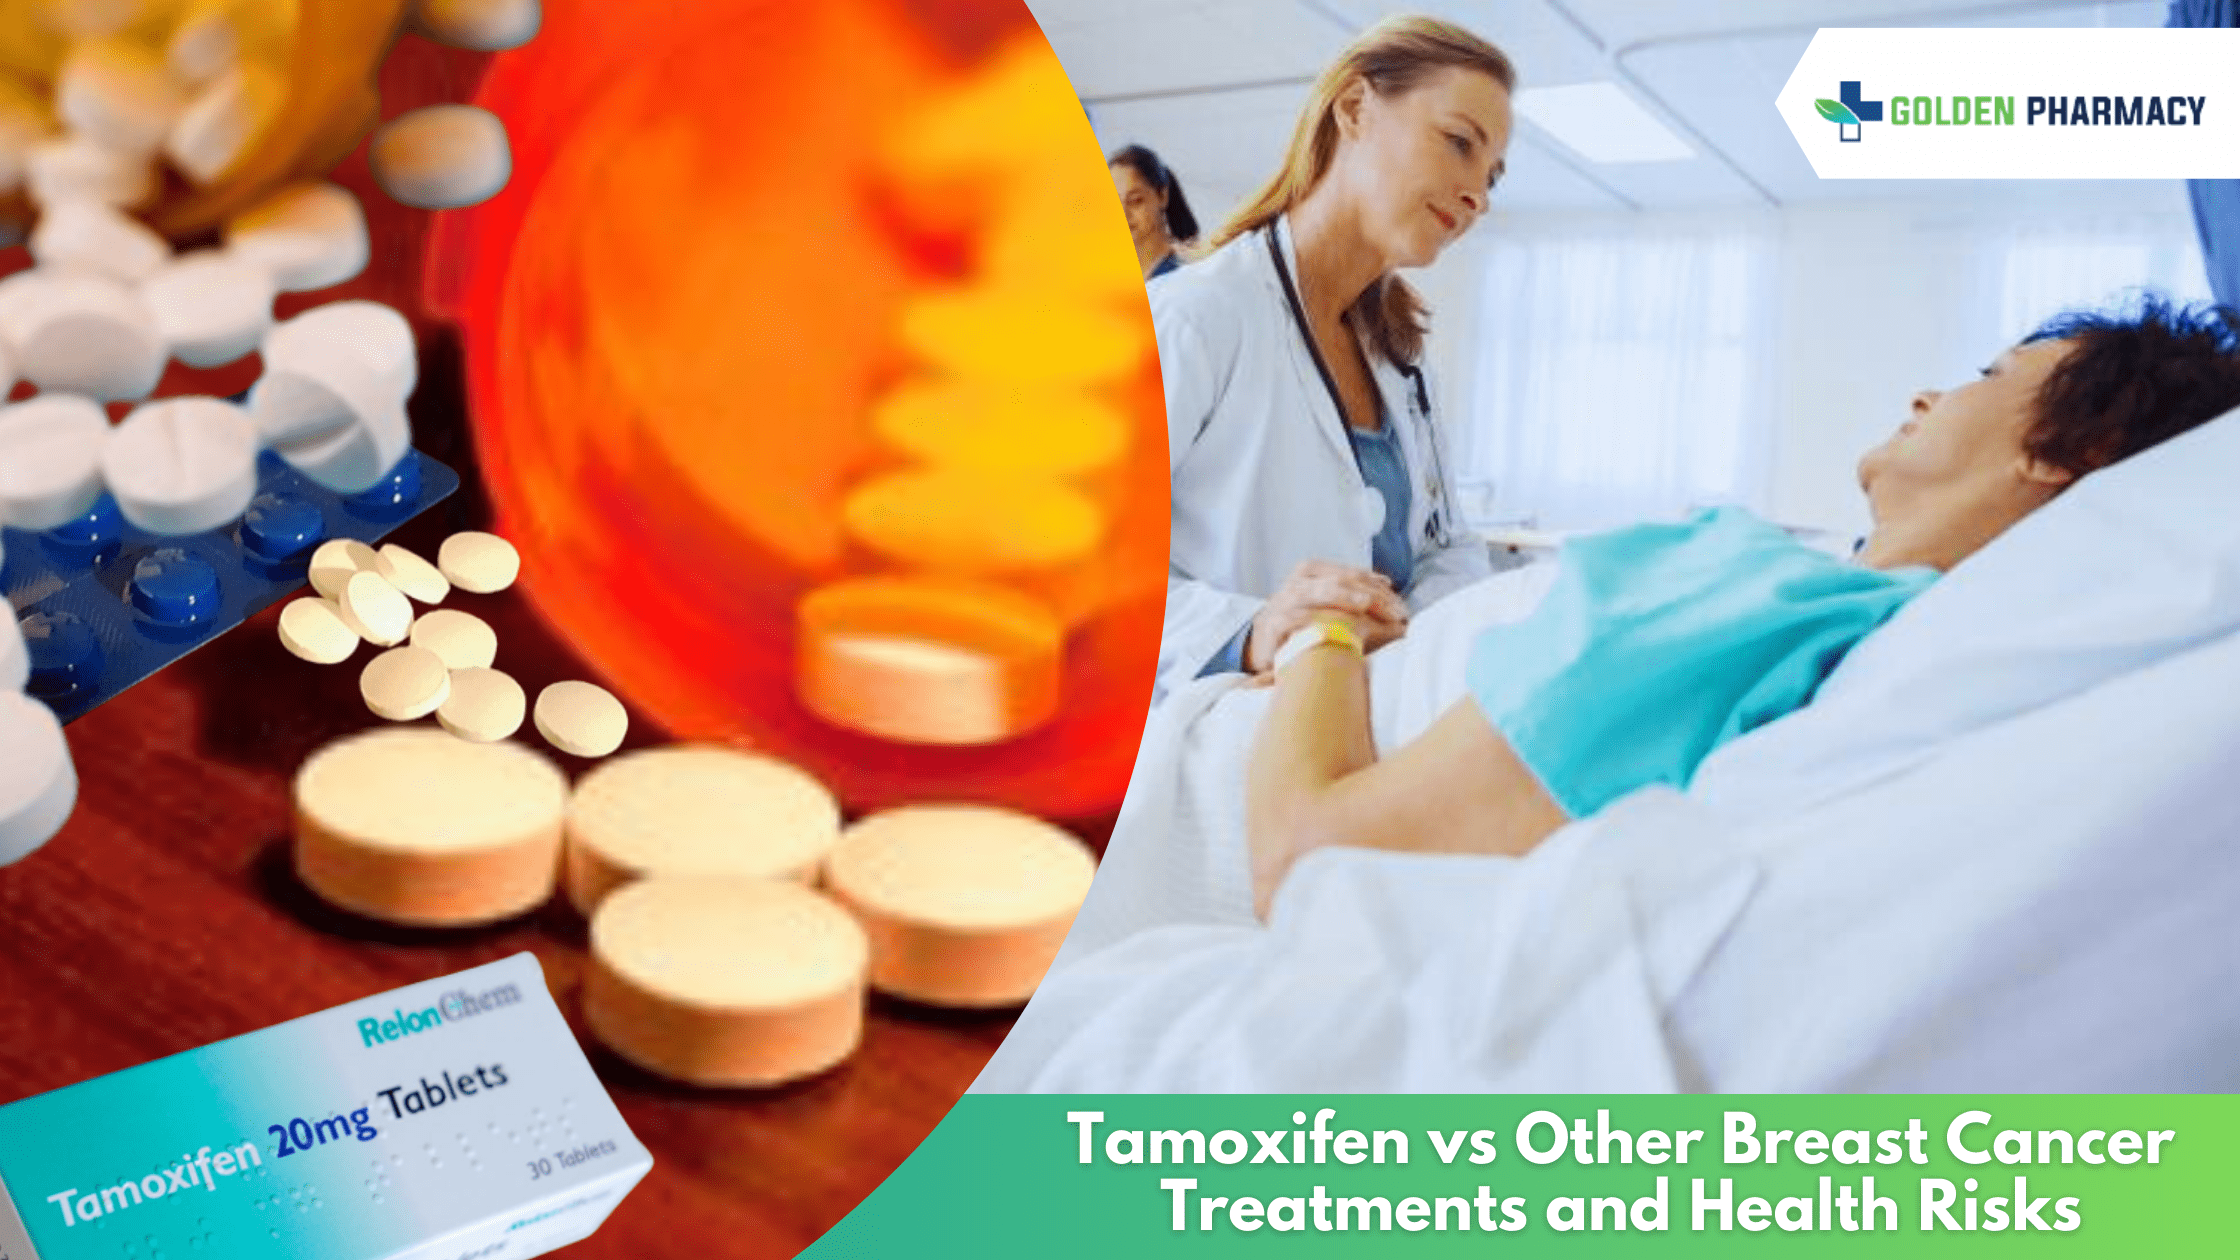 Tamoxifen vs Other Breast Cancer Treatments and Health Risks